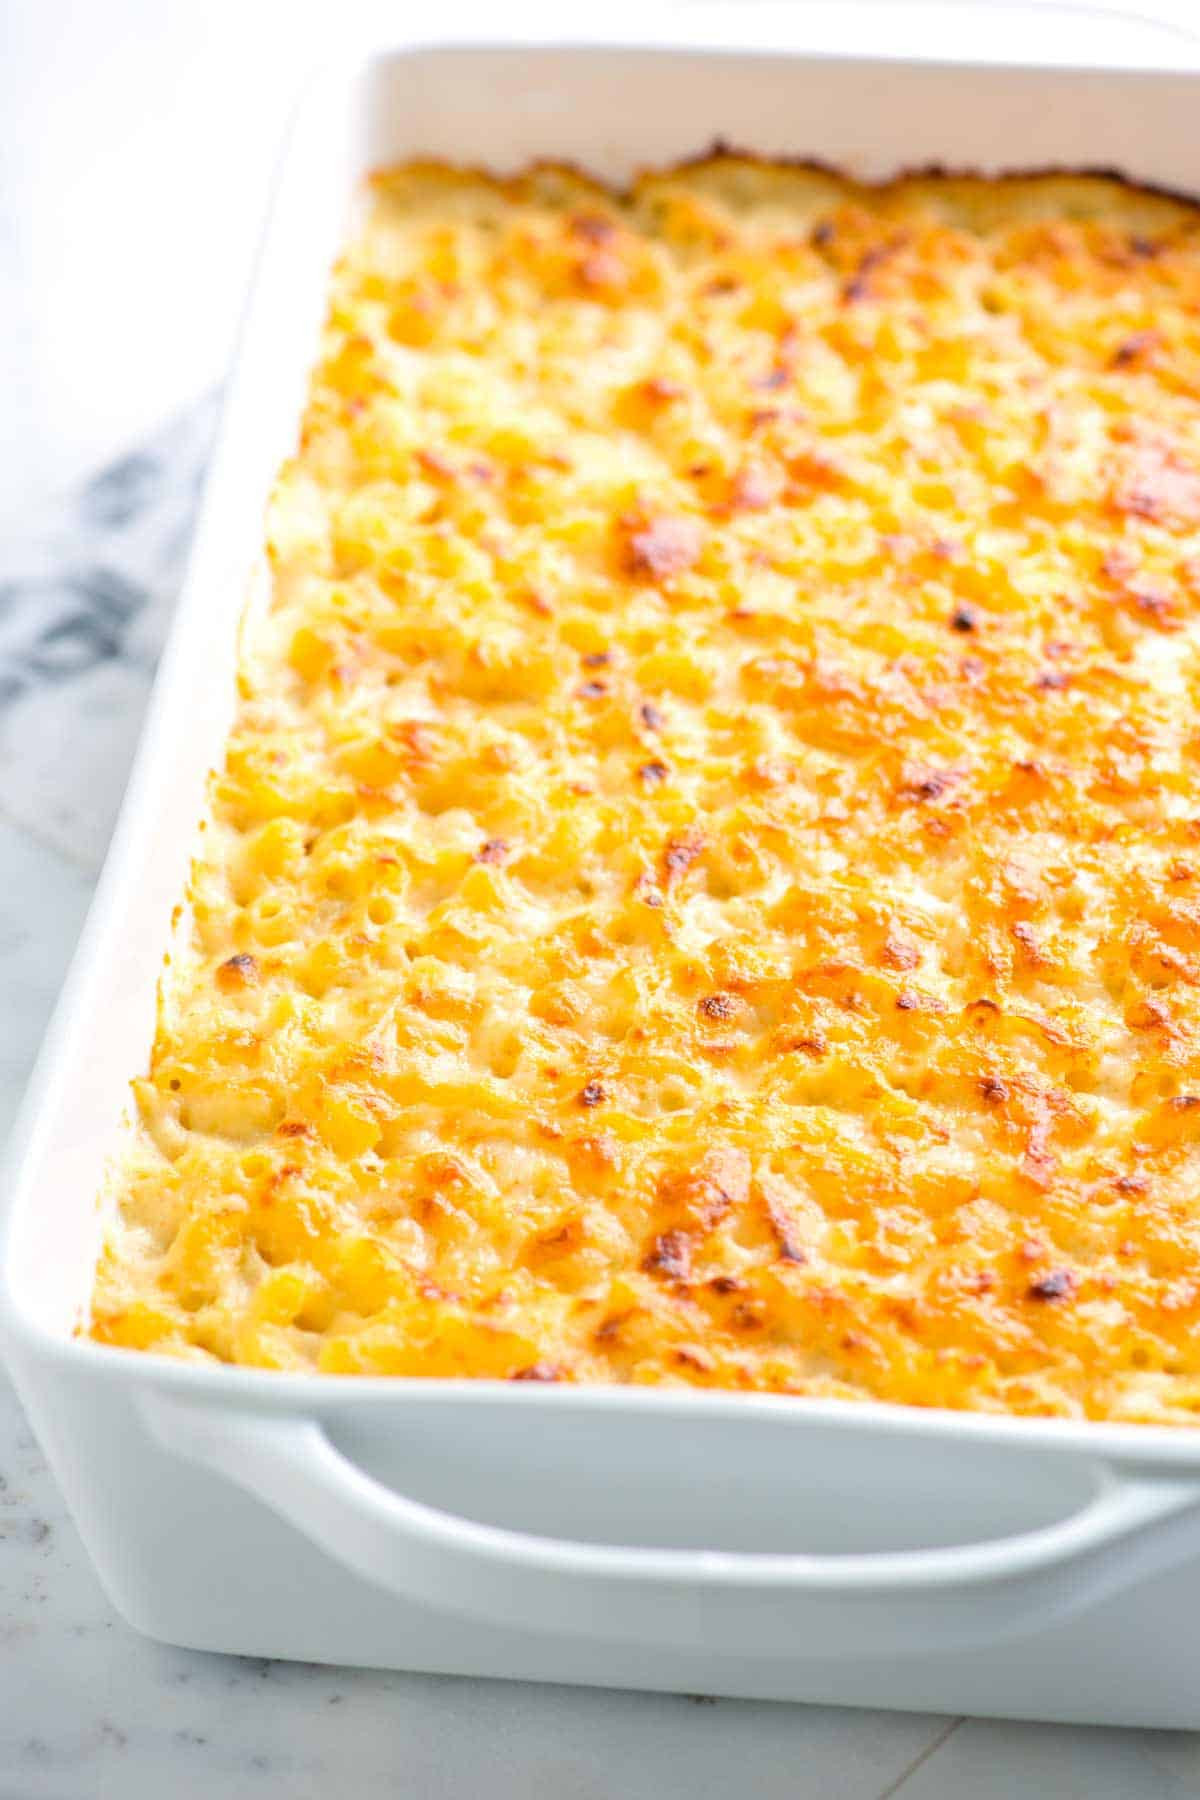 Extra Creamy Baked Macaroni And Cheese
 Easy Creamy Macaroni and Cheese Recipe